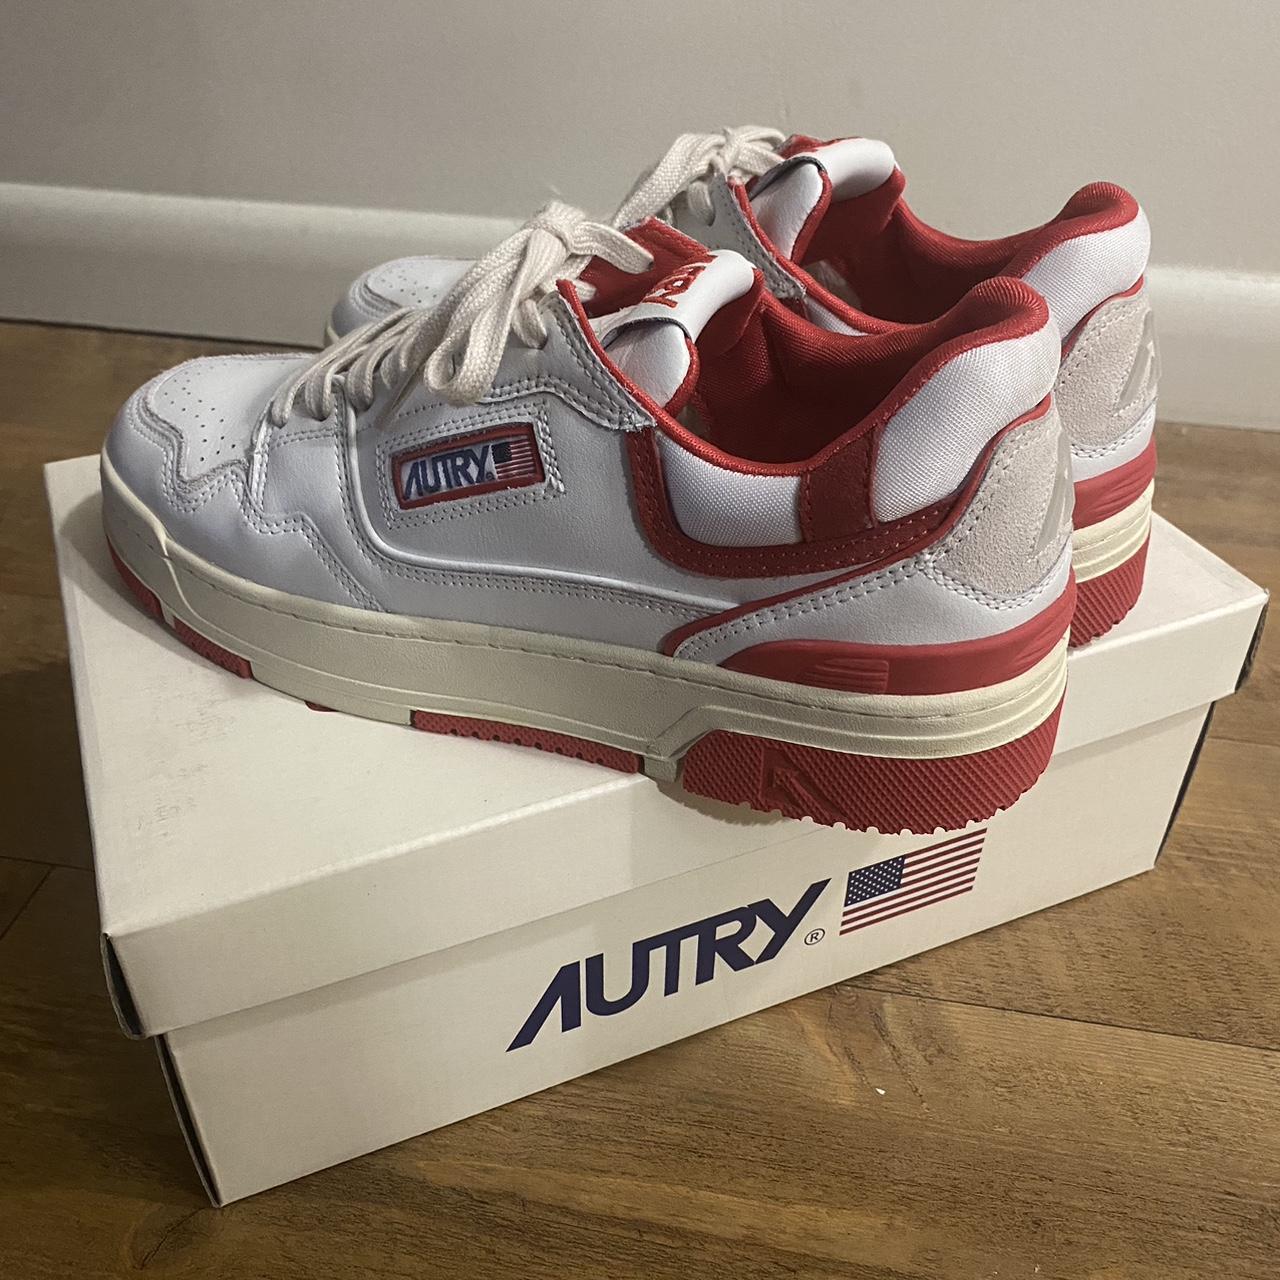 Autry Men's White and Red Trainers